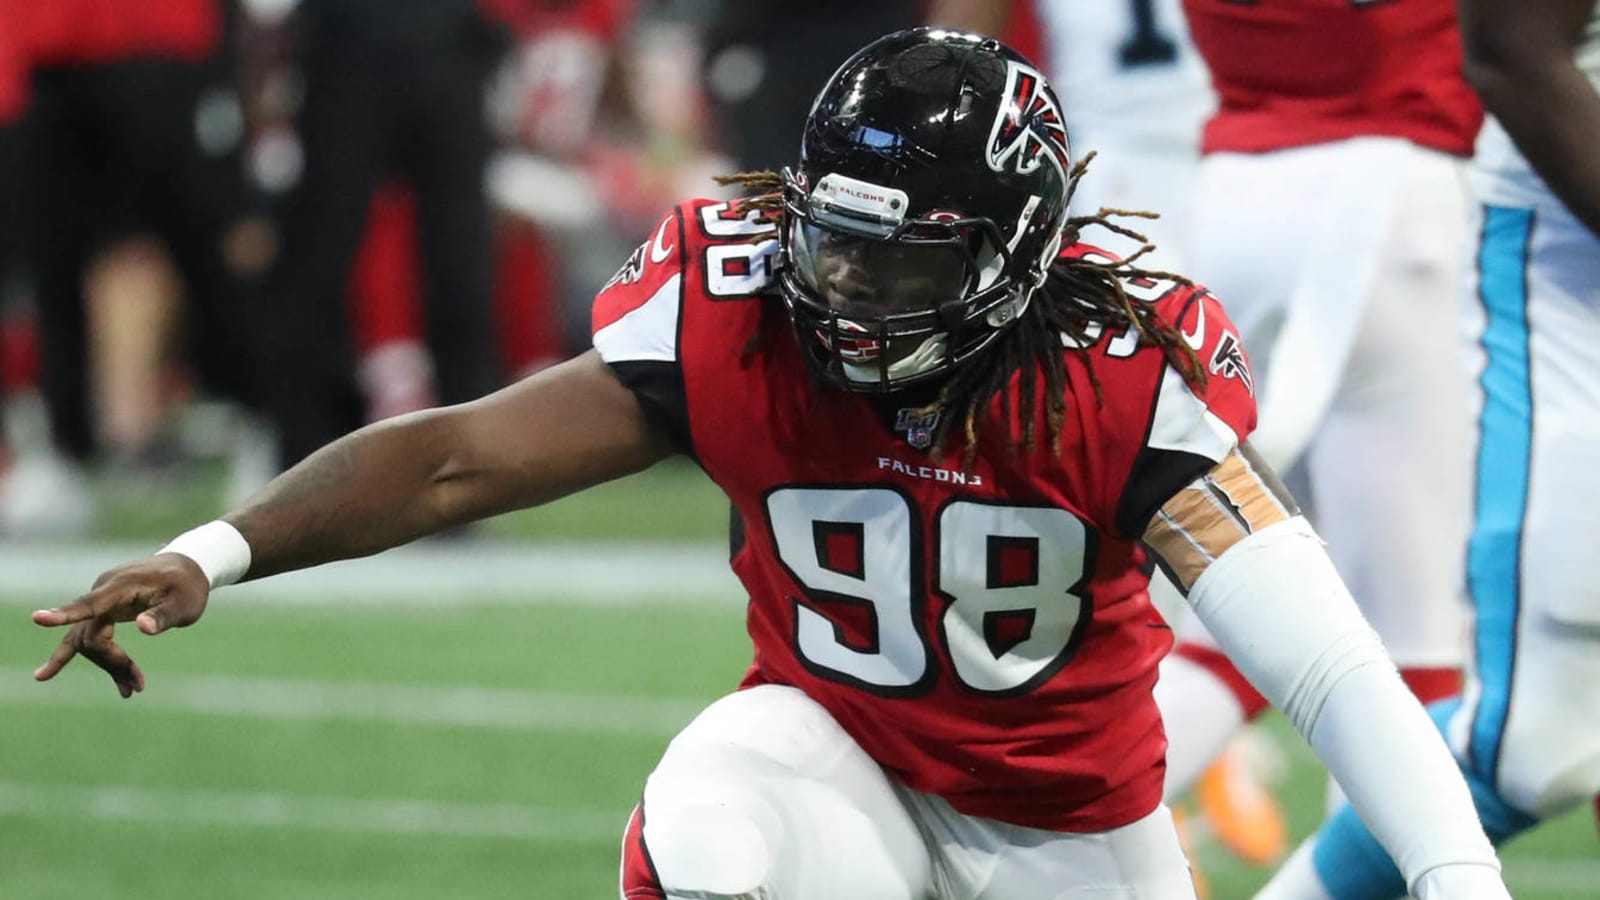 Takk McKinley's tweets are funny as he keeps switching teams